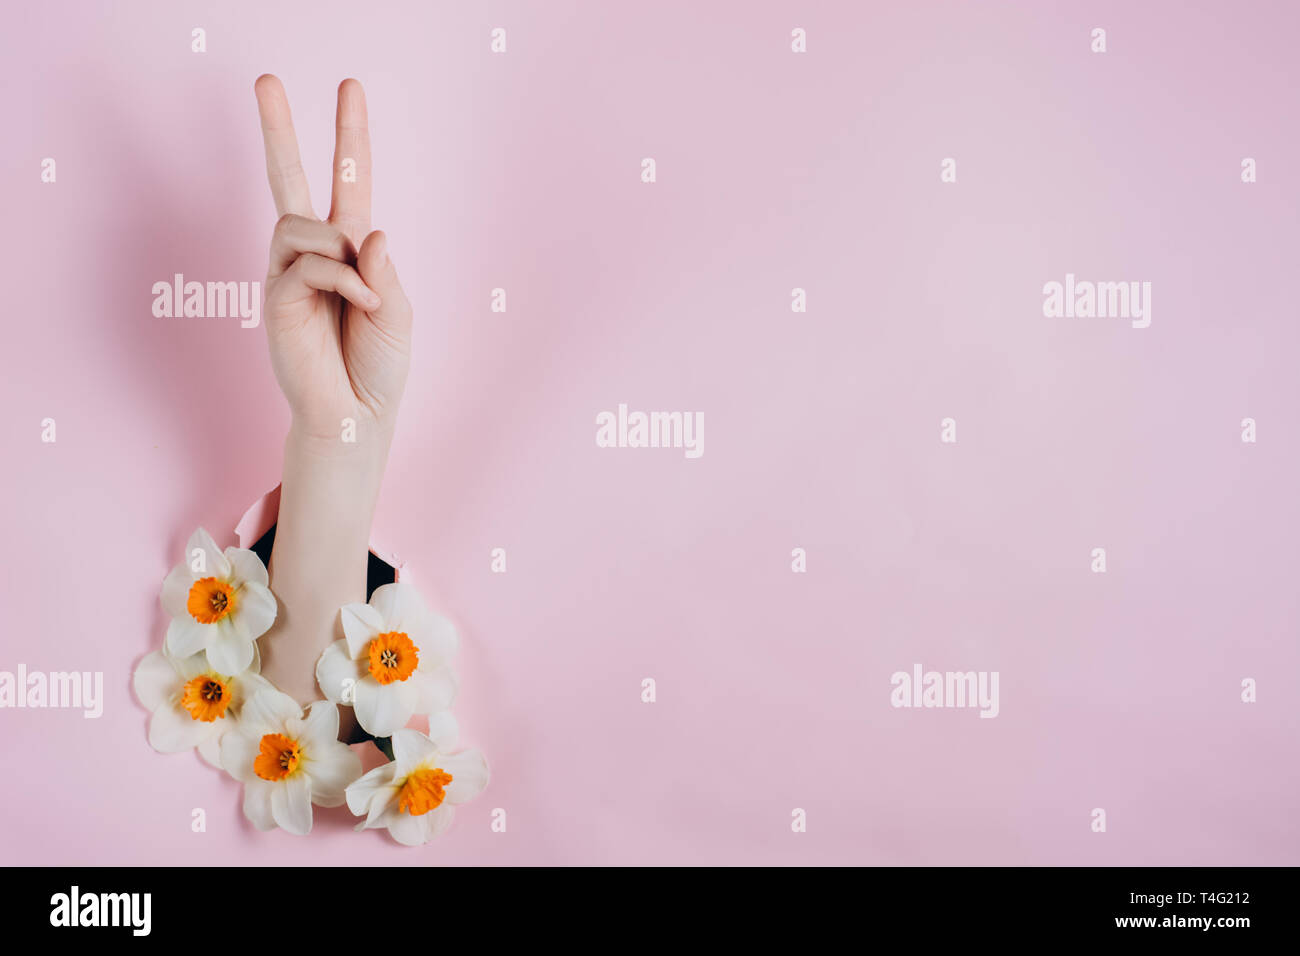 Female show hands with victory sign that can be seen through a hole in pink paper with flowers. Body language concept. Stock Photo